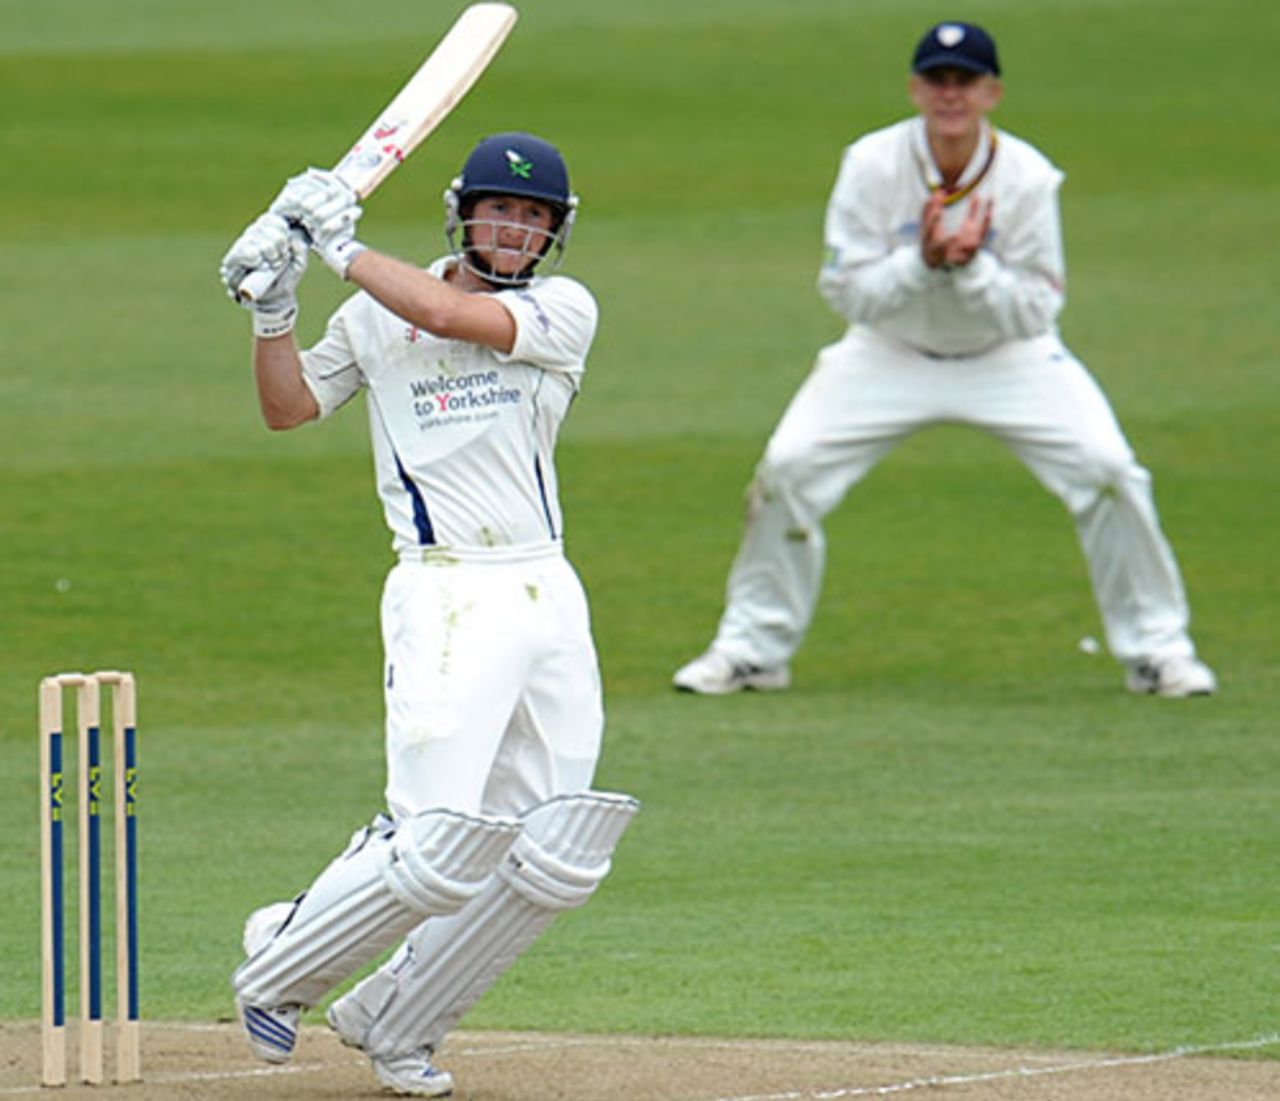 Adam Lyth scored 85 as the Yorkshire top order made the most of an injury-depleted Durham attack, Yorkshire v Durham, County Championship, Division One, Headingley, April 27, 2010